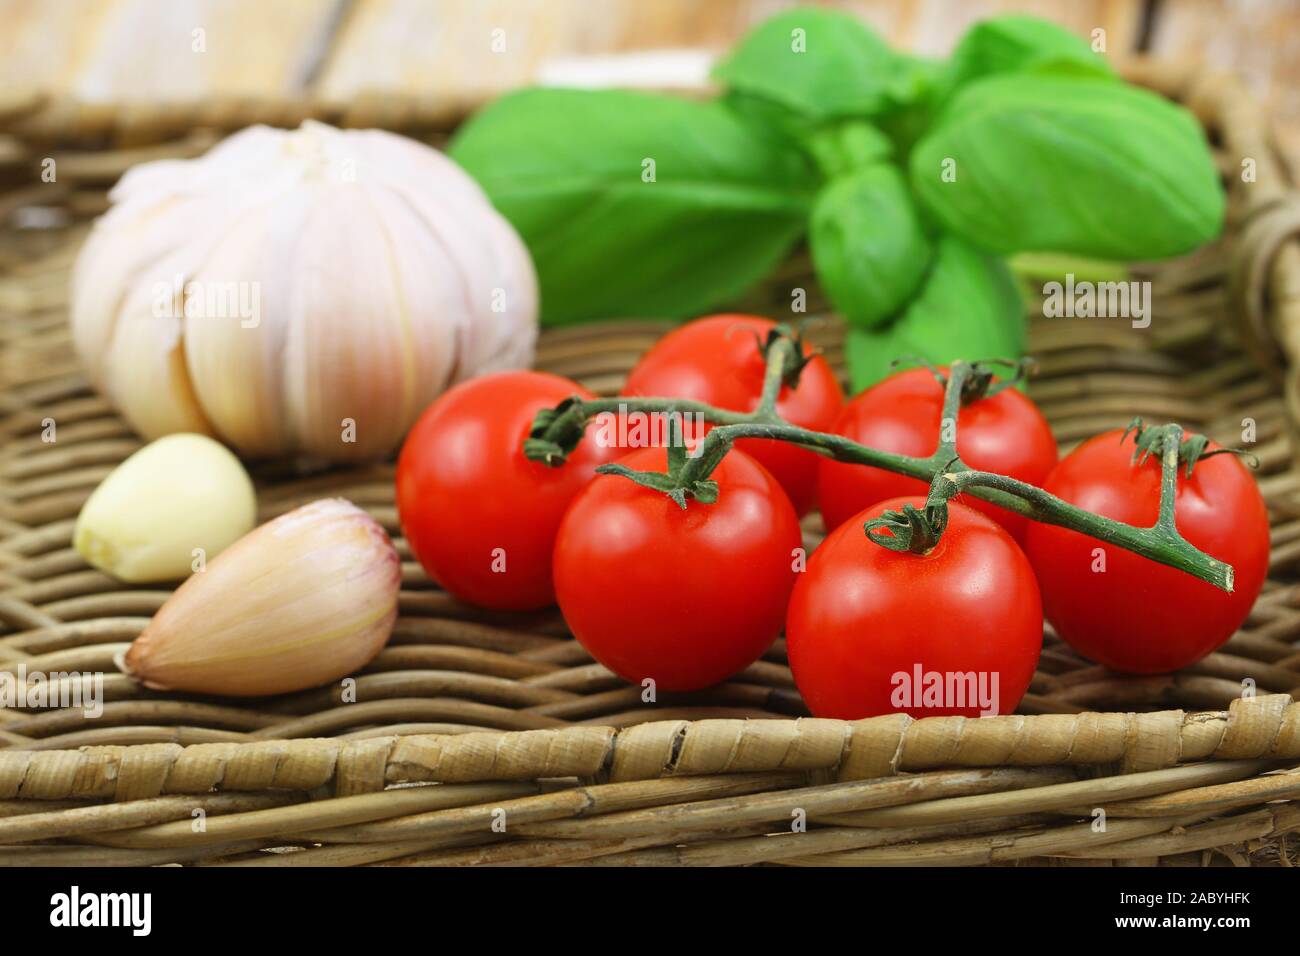 Selection of fresh organic ingredients for pasta: cherry tomatoes, garlic and basil on wicker tray Stock Photo